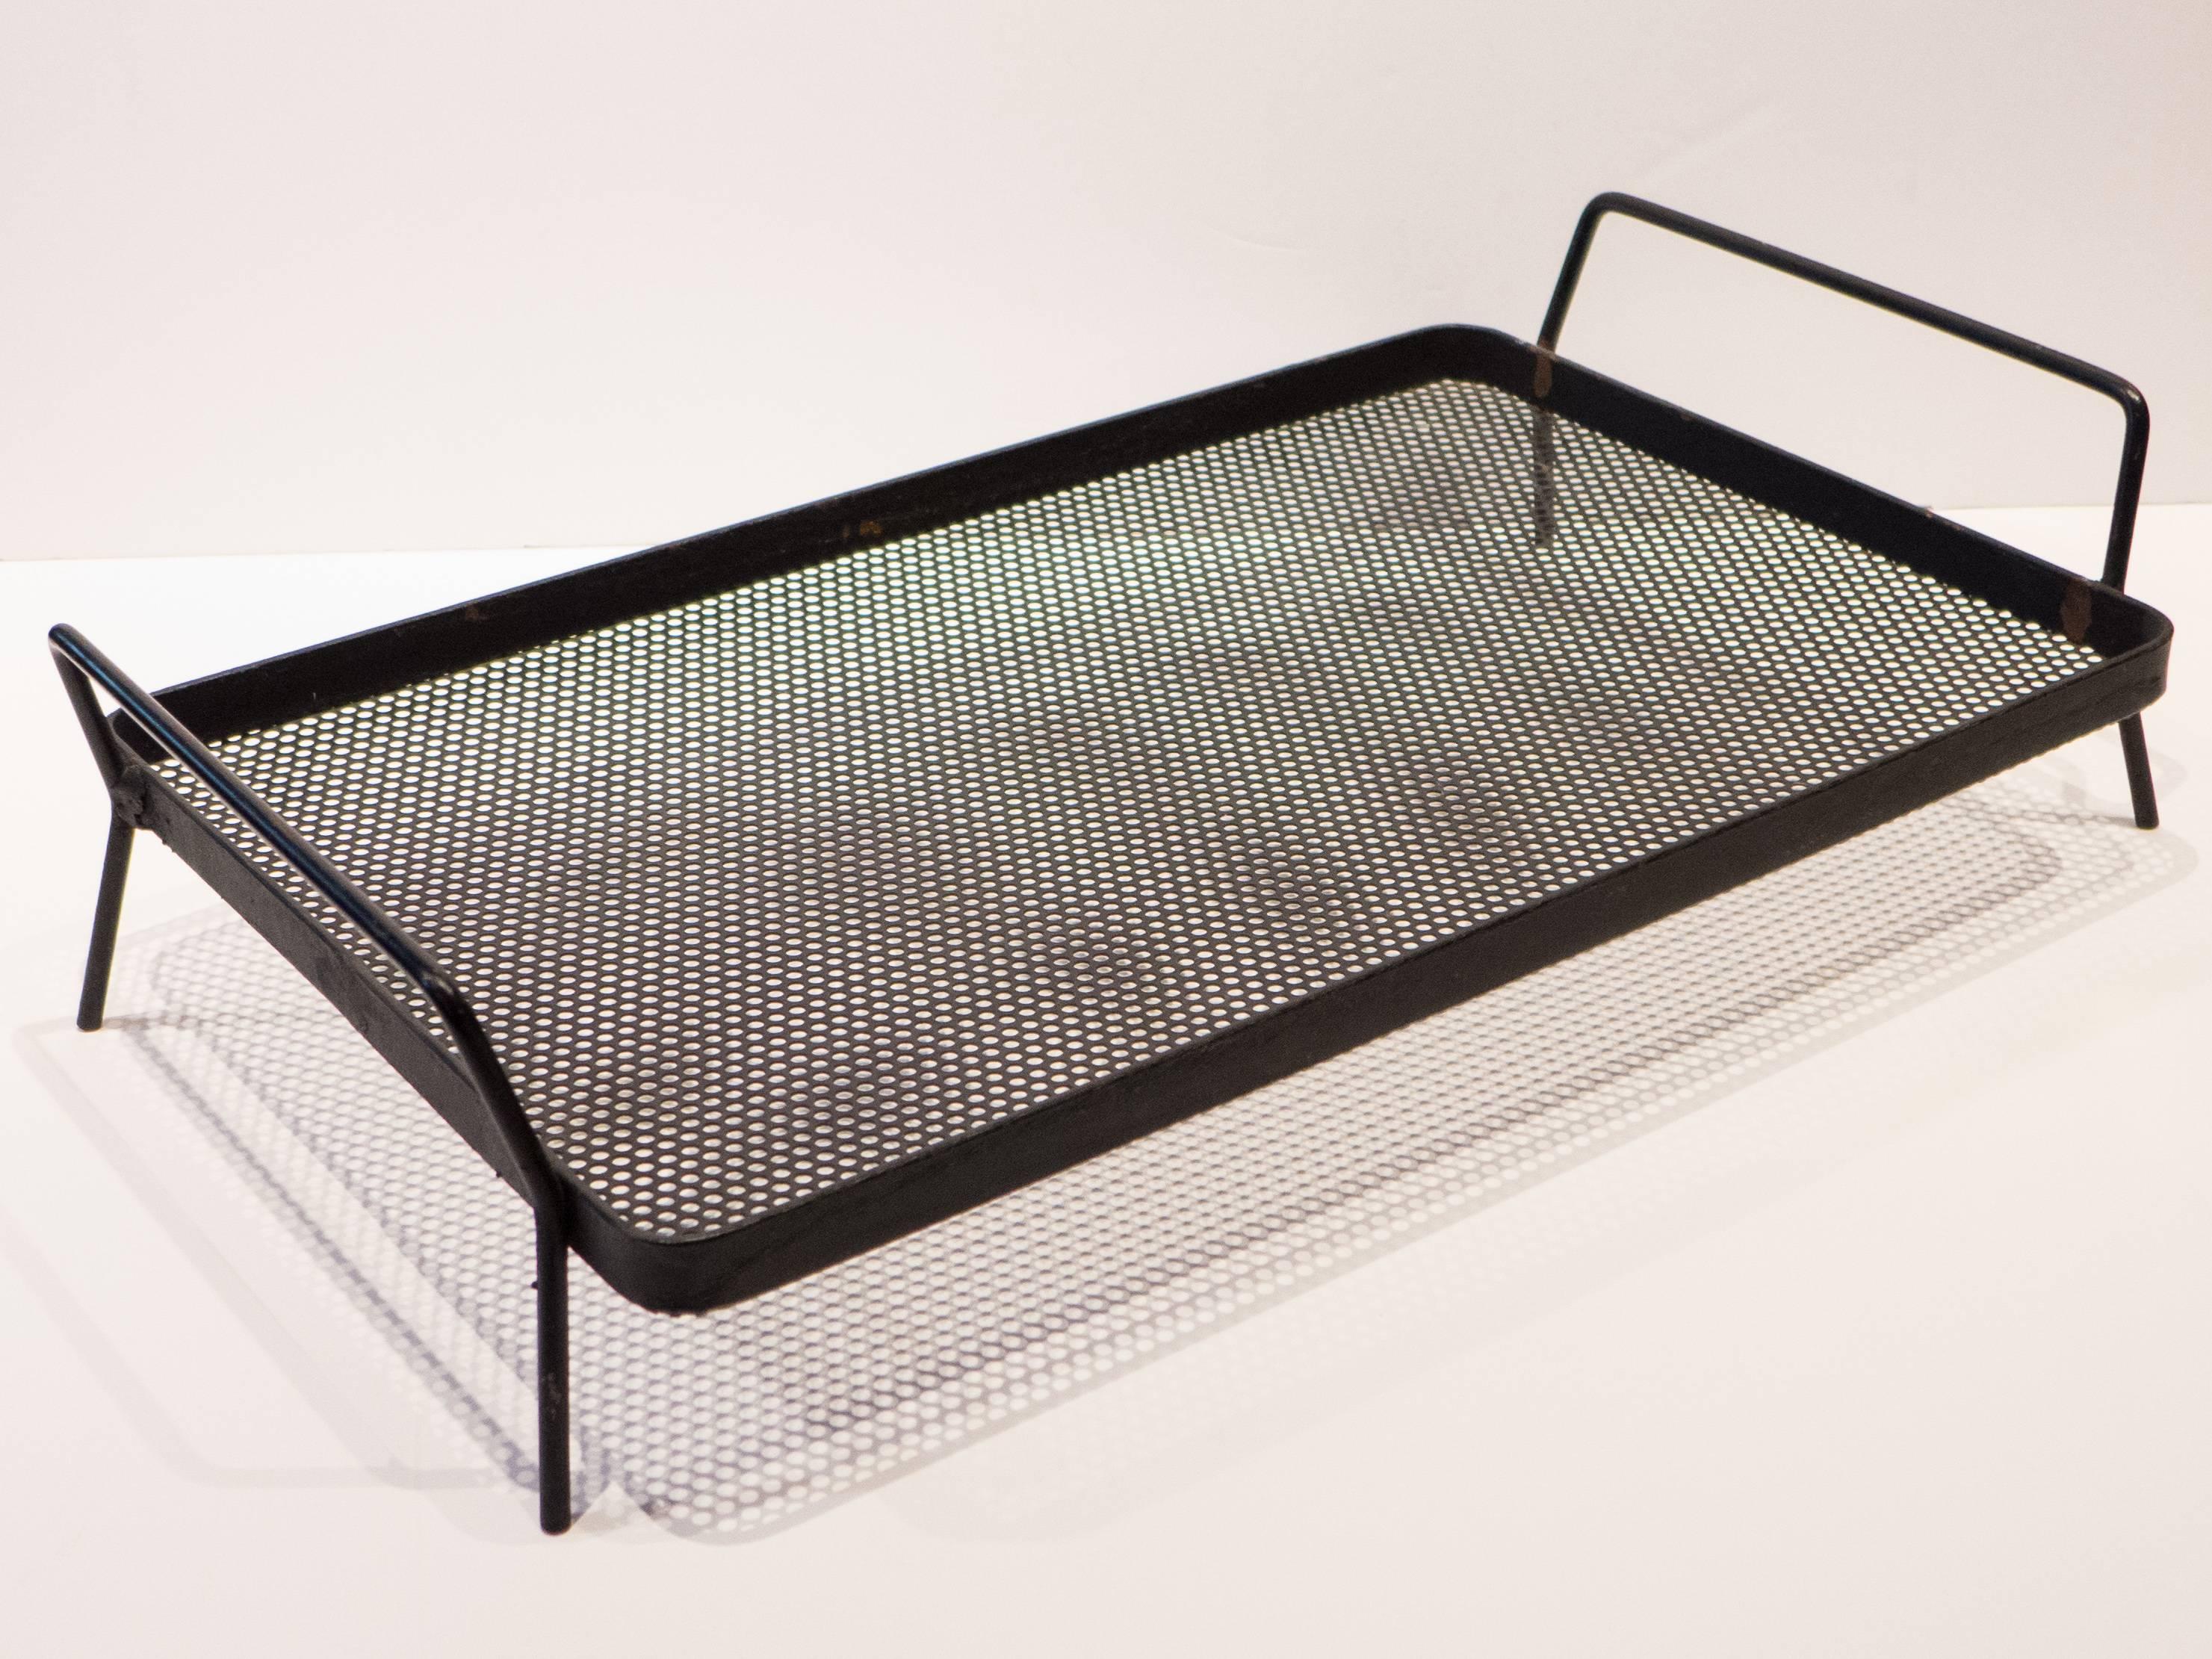 Footed tray of wrought iron and perforated metal by industrial and landscape designer Richard Galef, produced by Ravenware, circa 1952. The tray itself measures 18